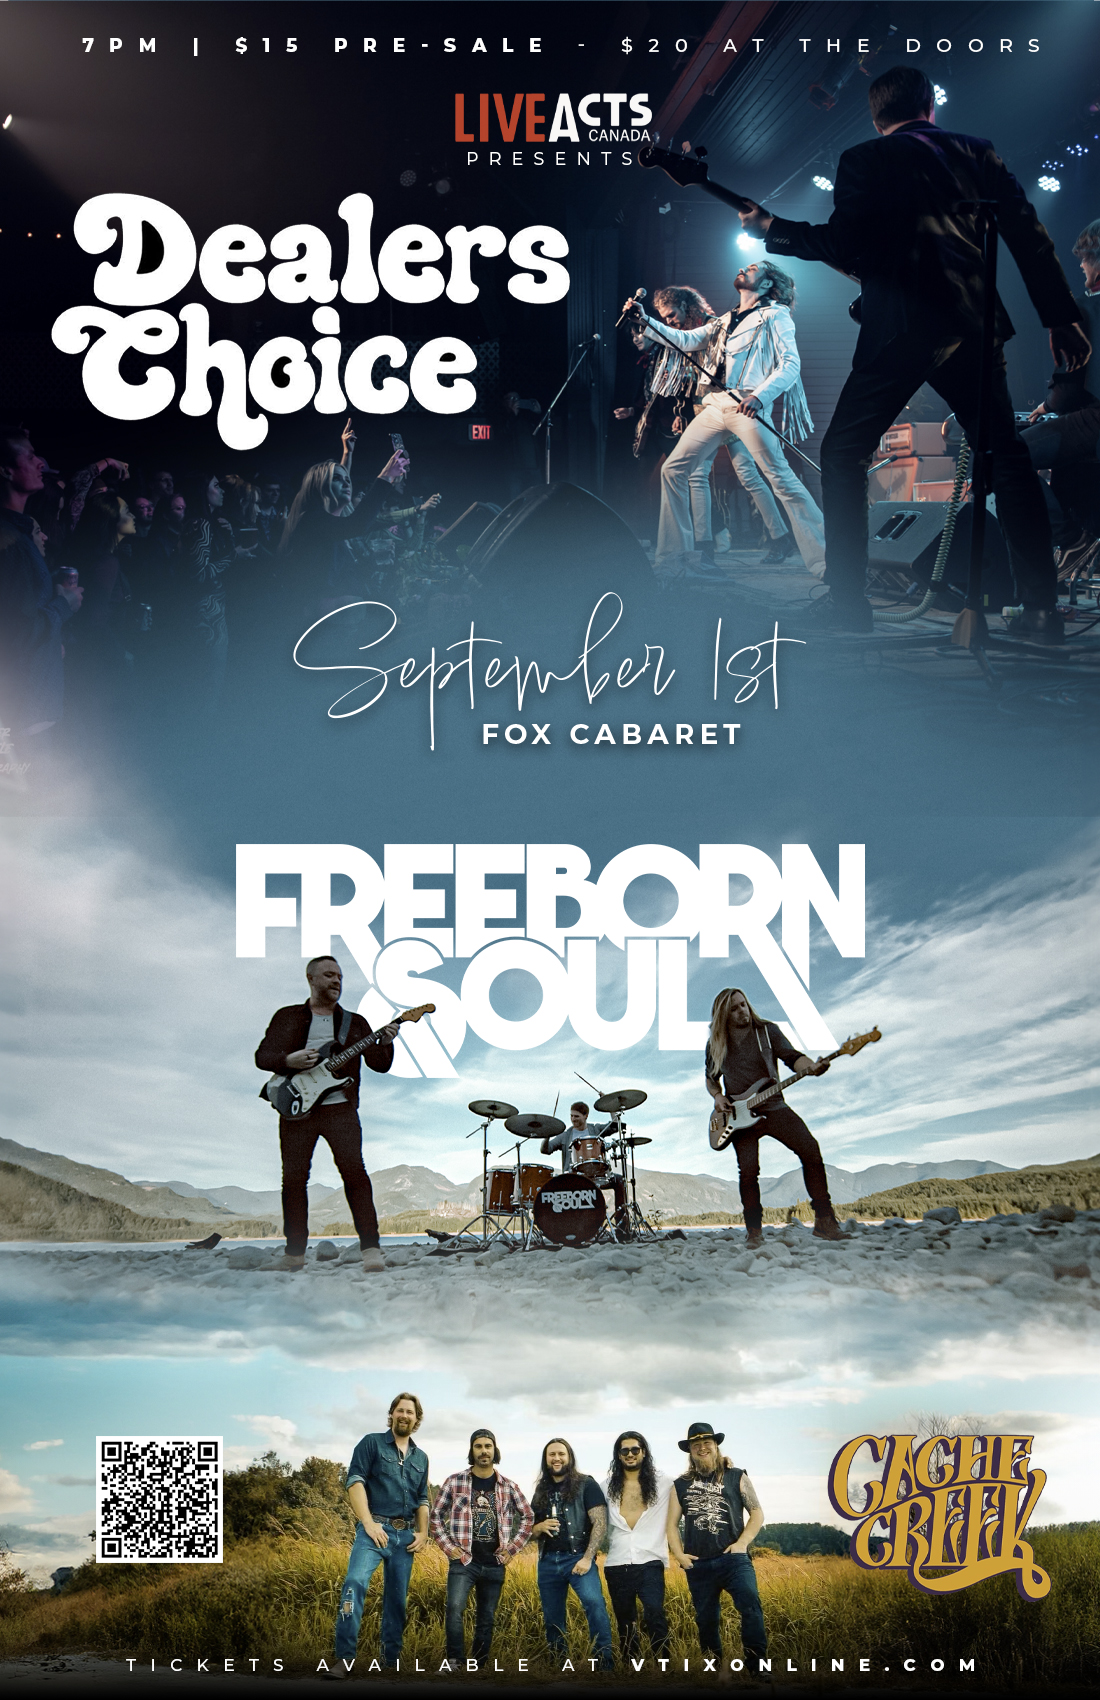 Dealers Choice with Special Guests Freeborn Soul and Cache Creek